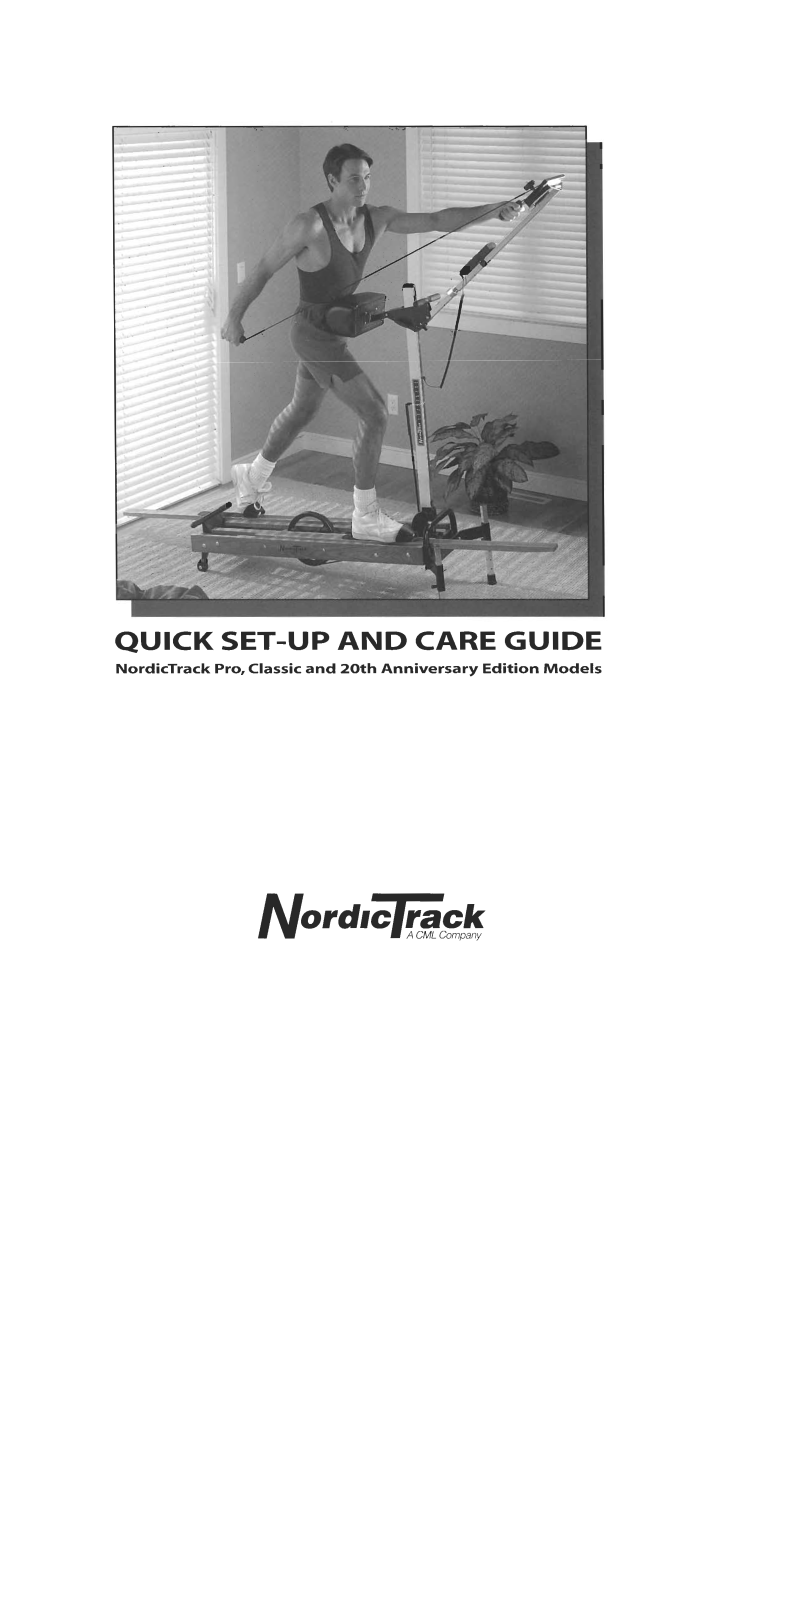 NordicTrack NT289990, NT267300, NT247210, NT247190, NT286010 Owner's Manual